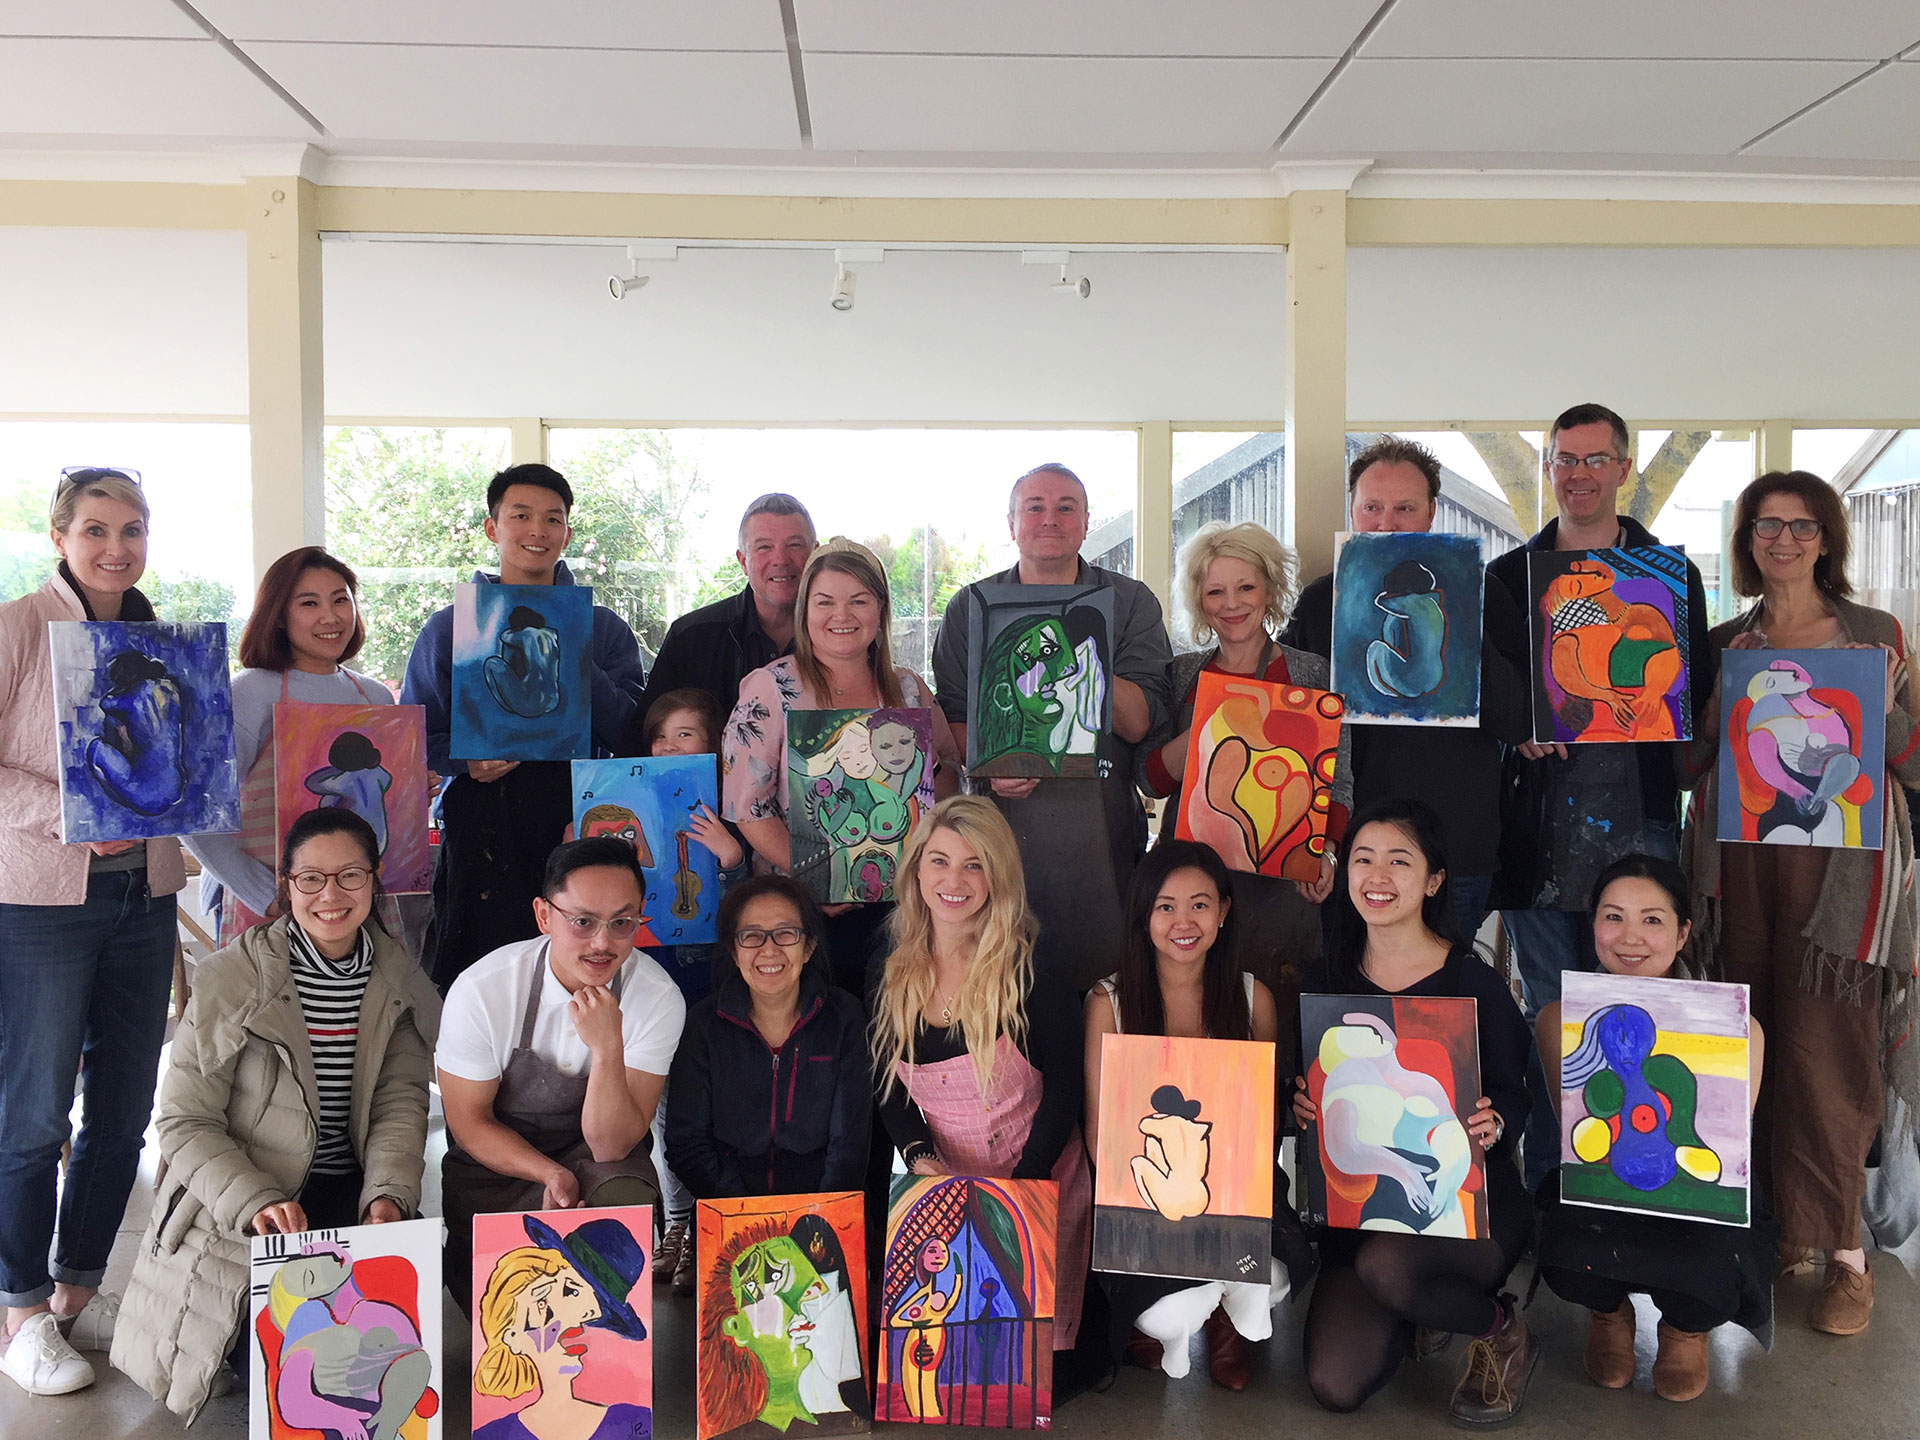 Yarra Valley Paint & Sip at Elmswood Estate – A Picasso Party!